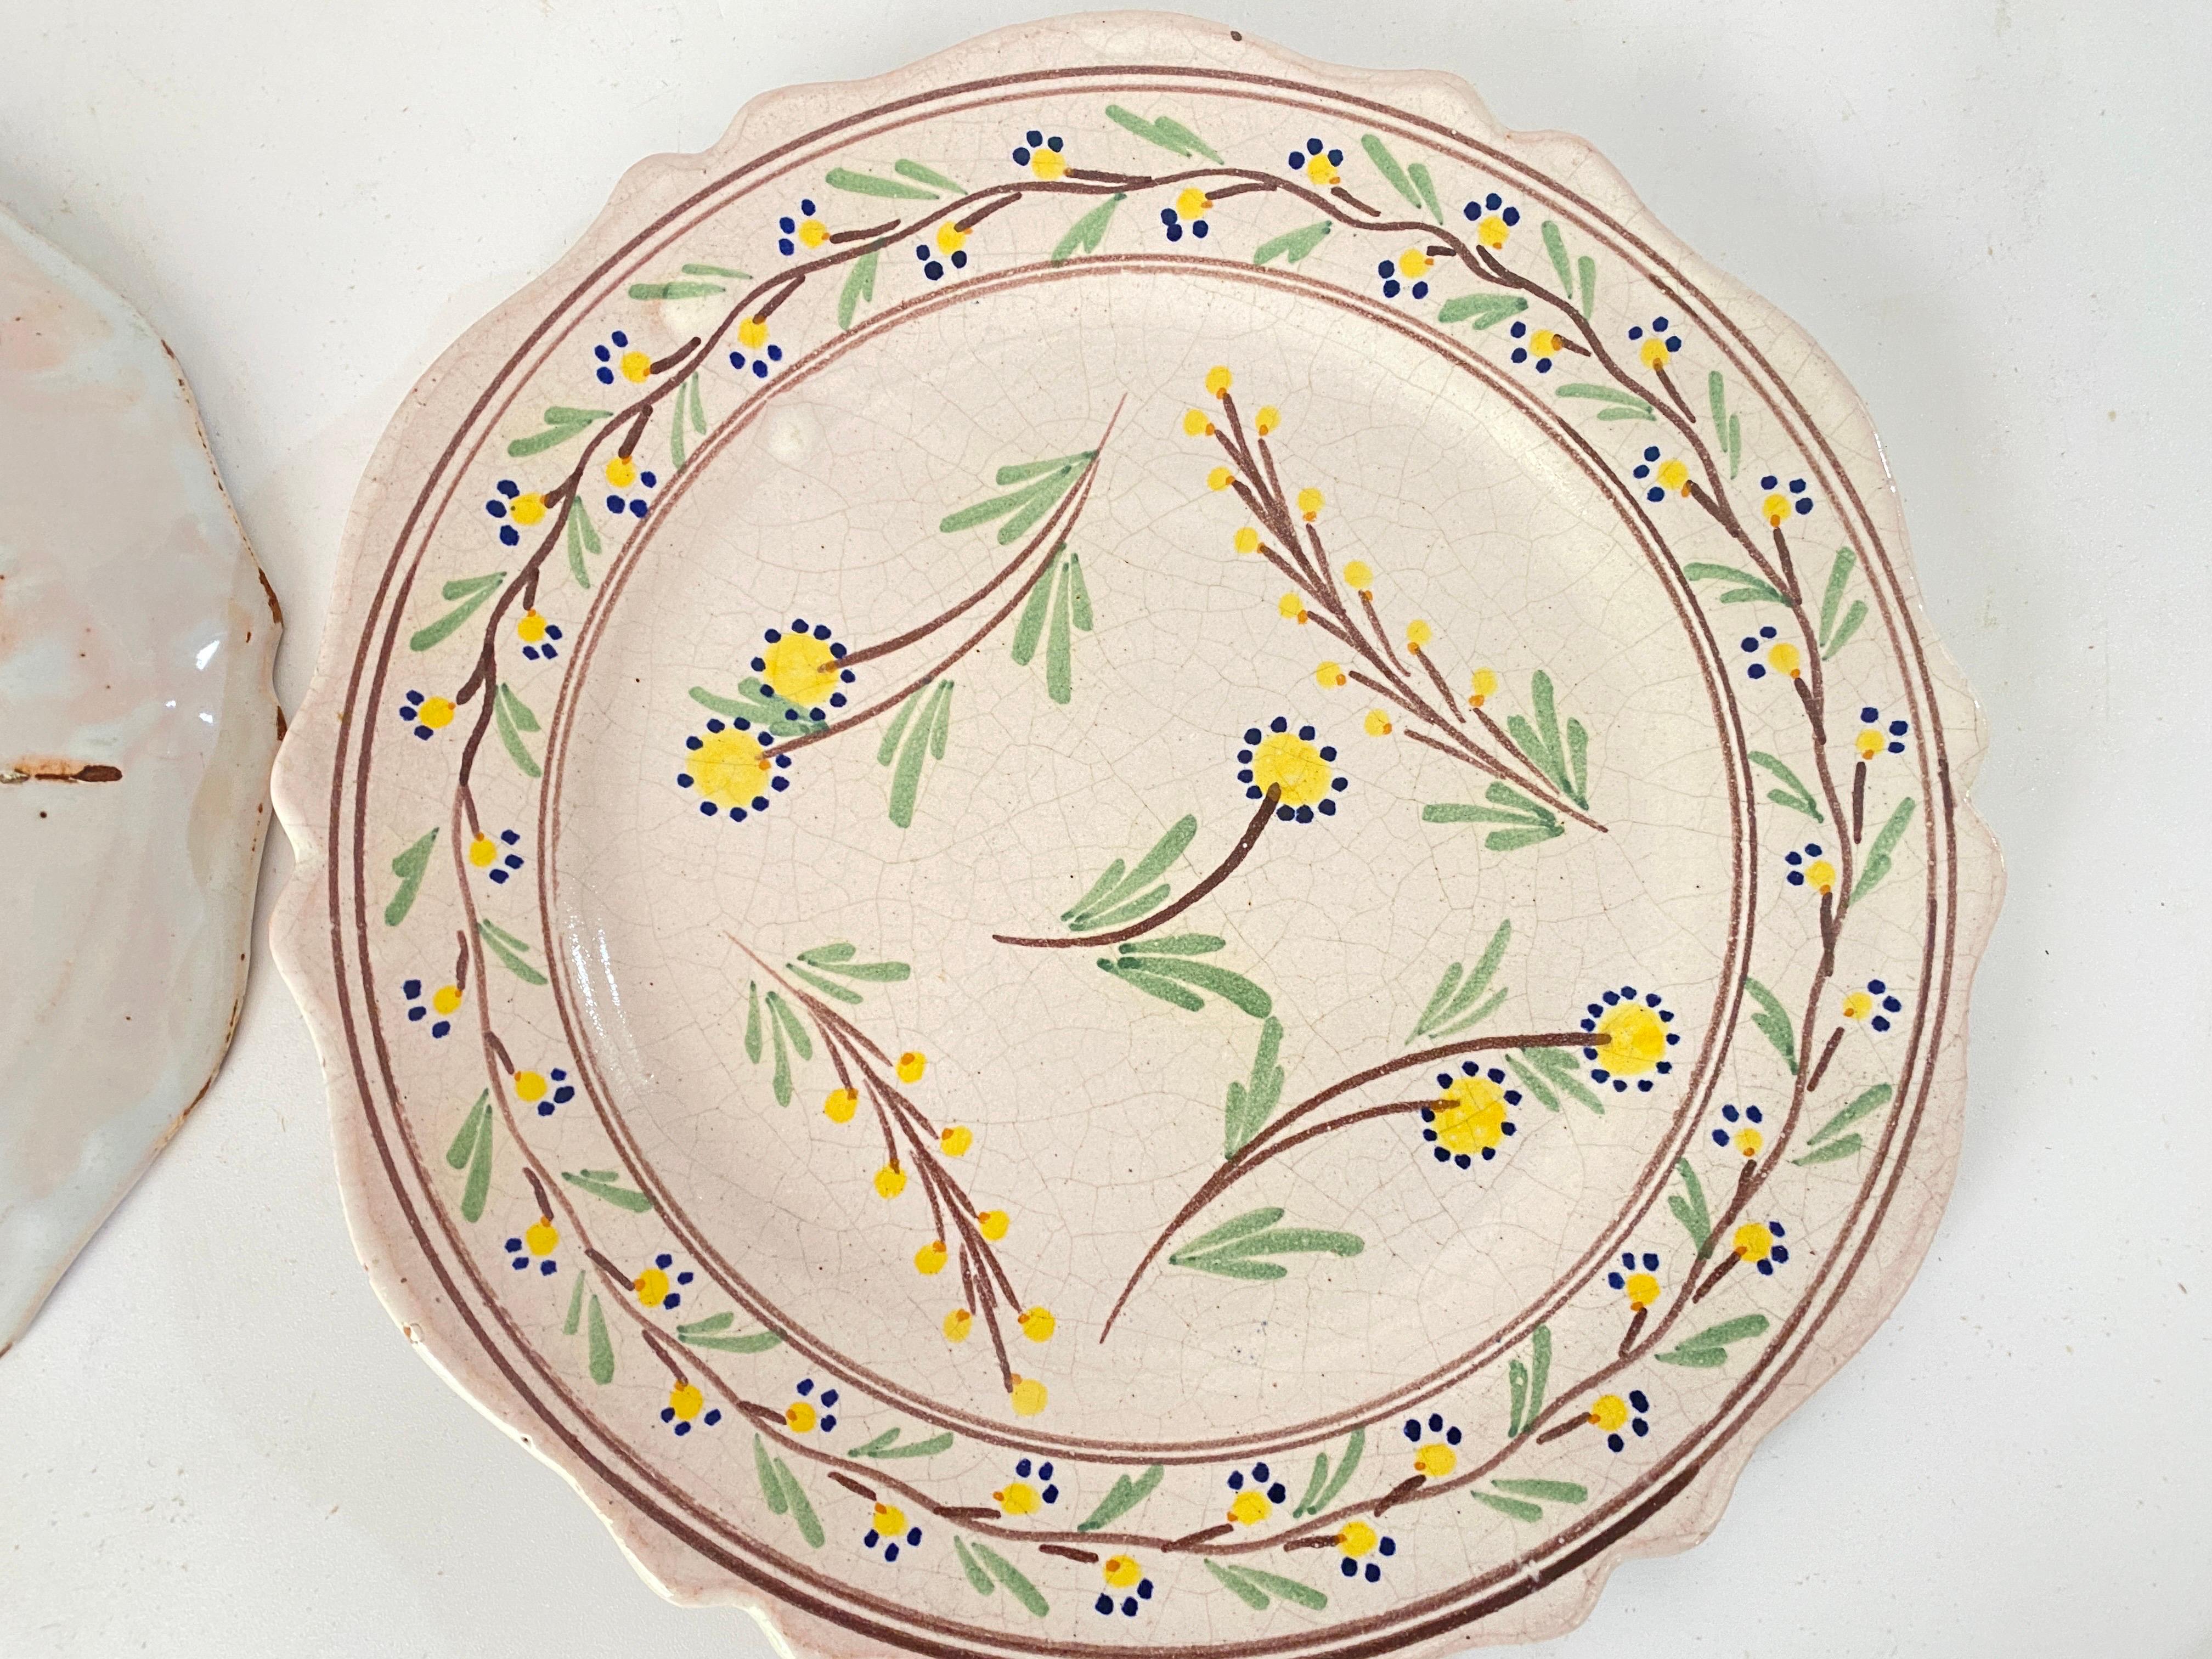 French Faience Plates 19th Century Flowers Decor Pattern Blue, Green Set of 4 For Sale 1